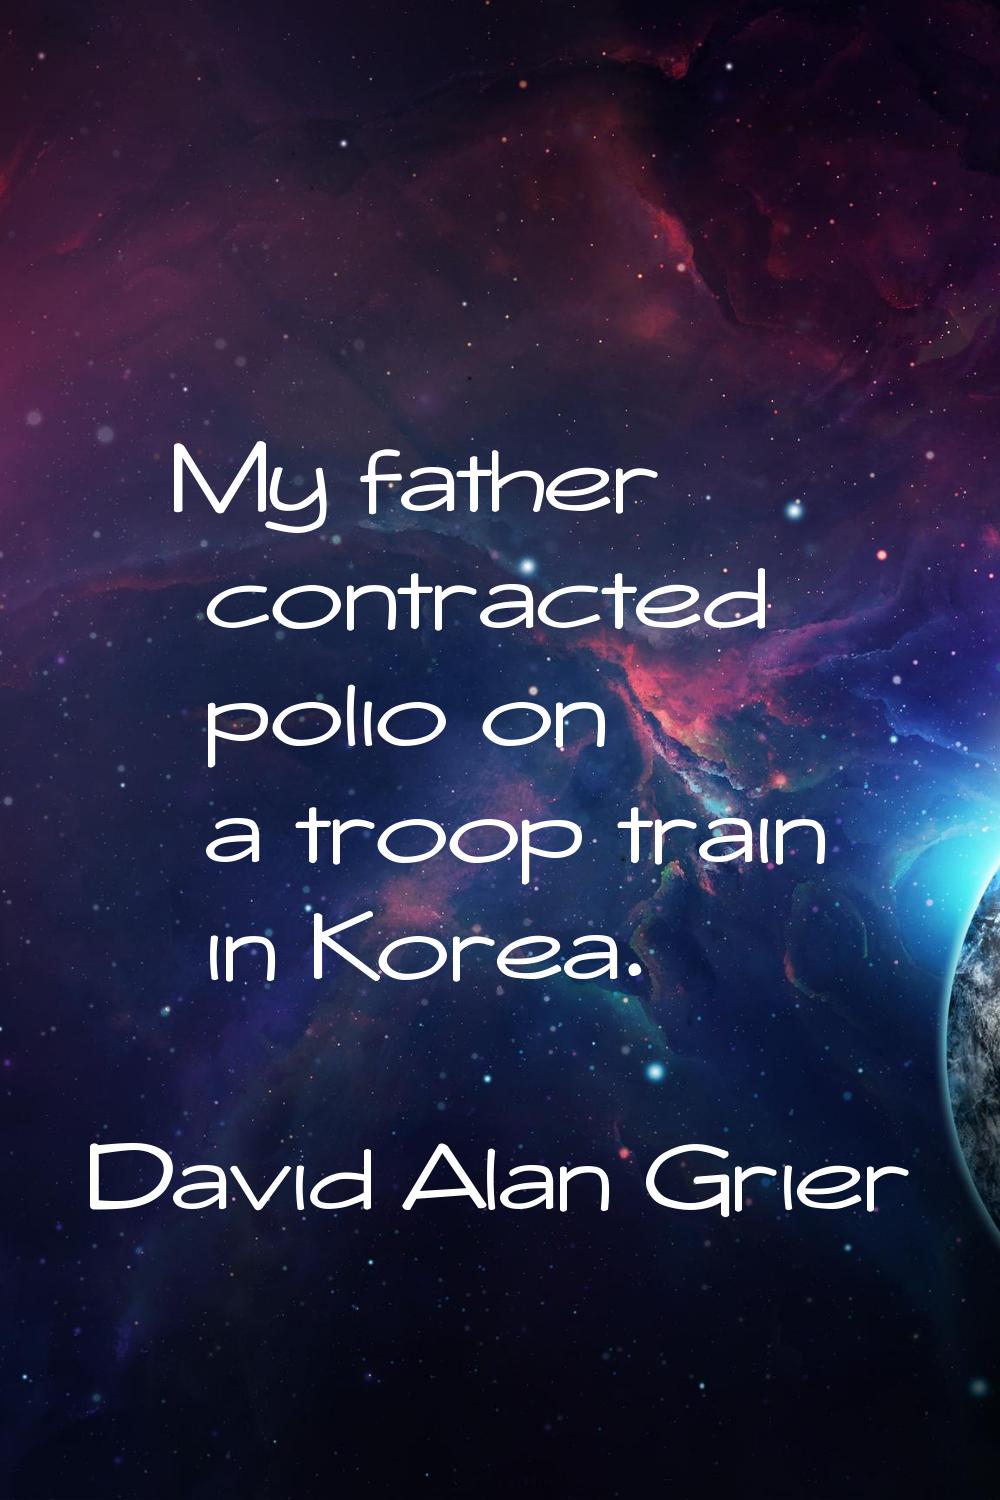 My father contracted polio on a troop train in Korea.